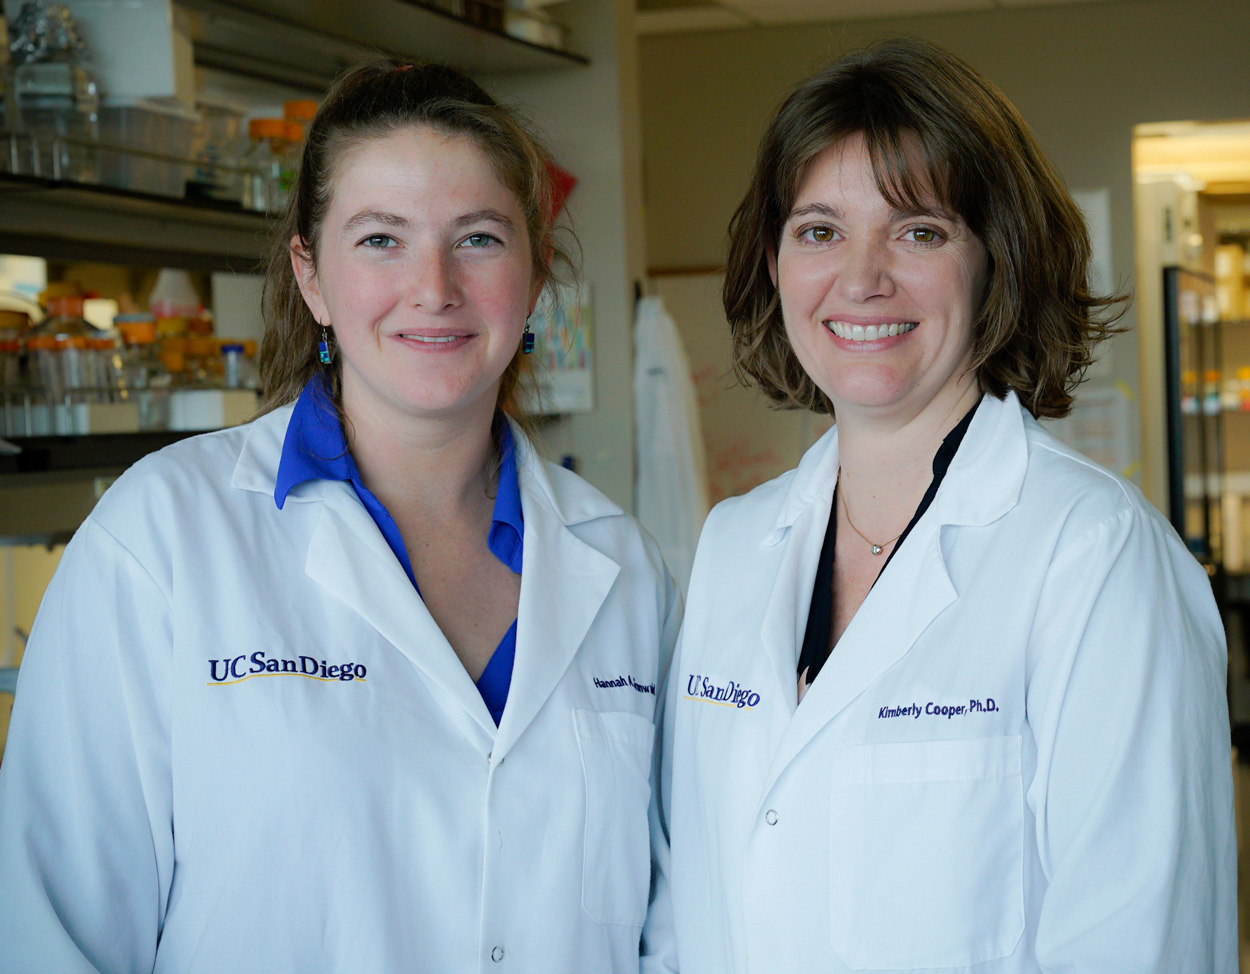 Hannah Grunwald and Assistant Professor Kimberly Cooper wearing lab coats inside Cooper's lab